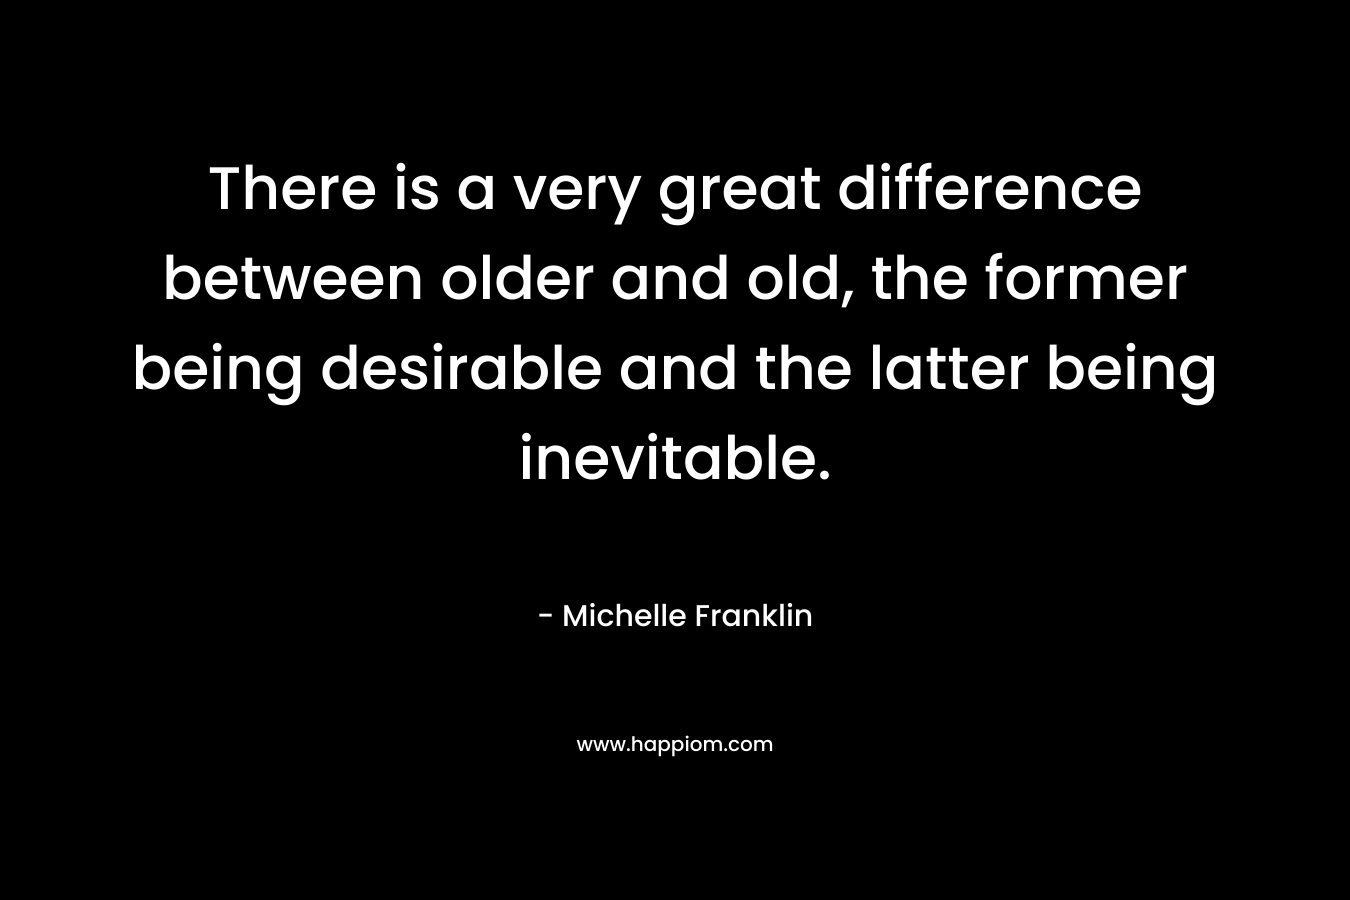 There is a very great difference between older and old, the former being desirable and the latter being inevitable. – Michelle Franklin